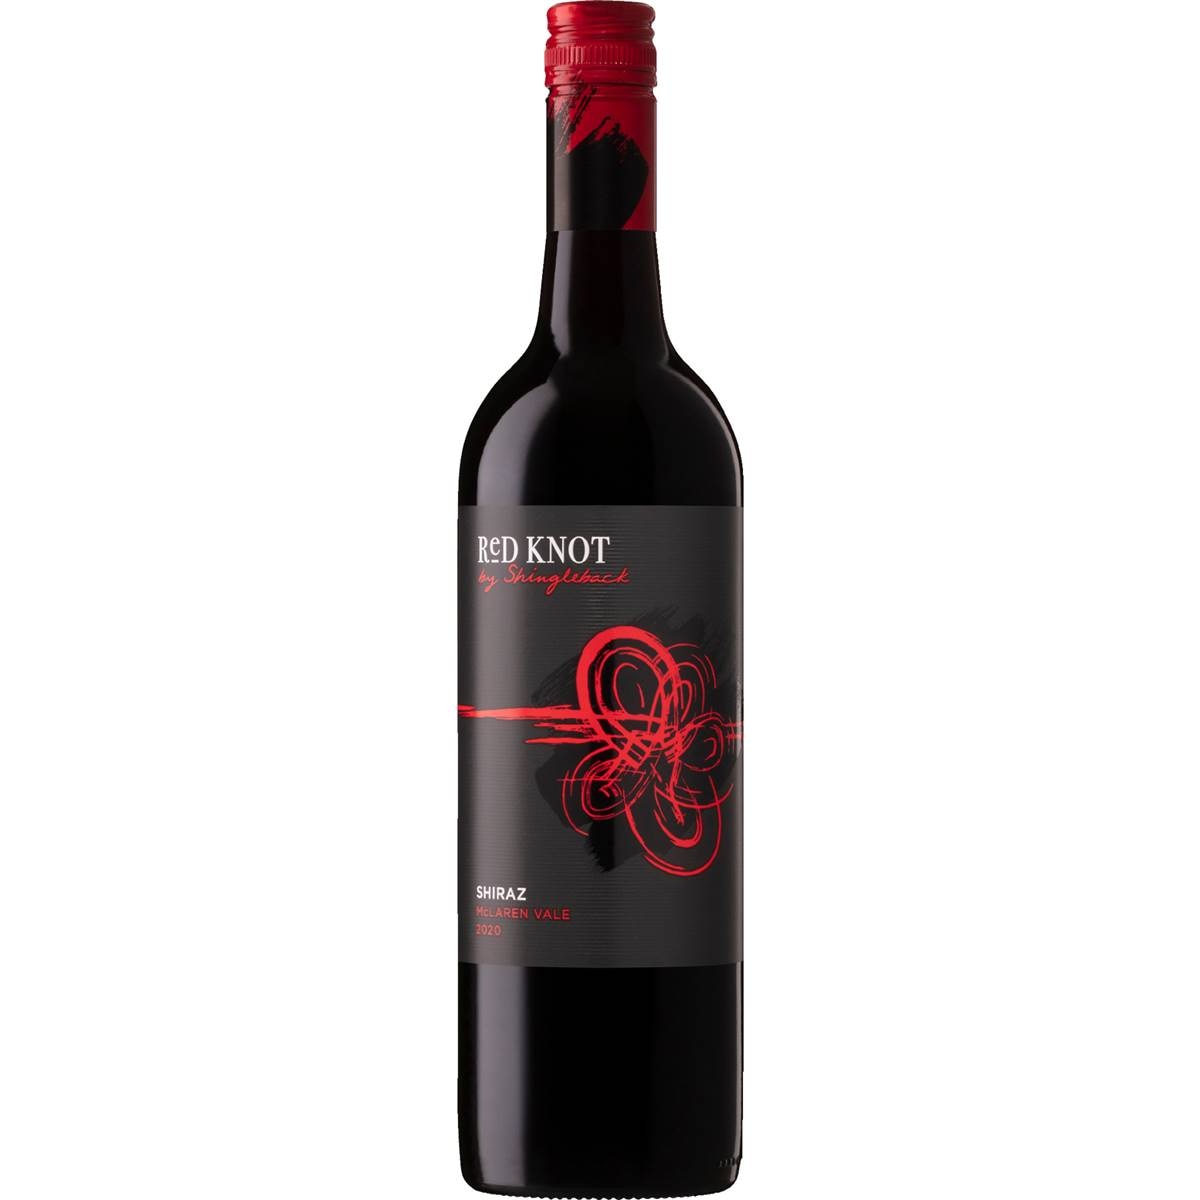 Calories in Red Knot Shiraz